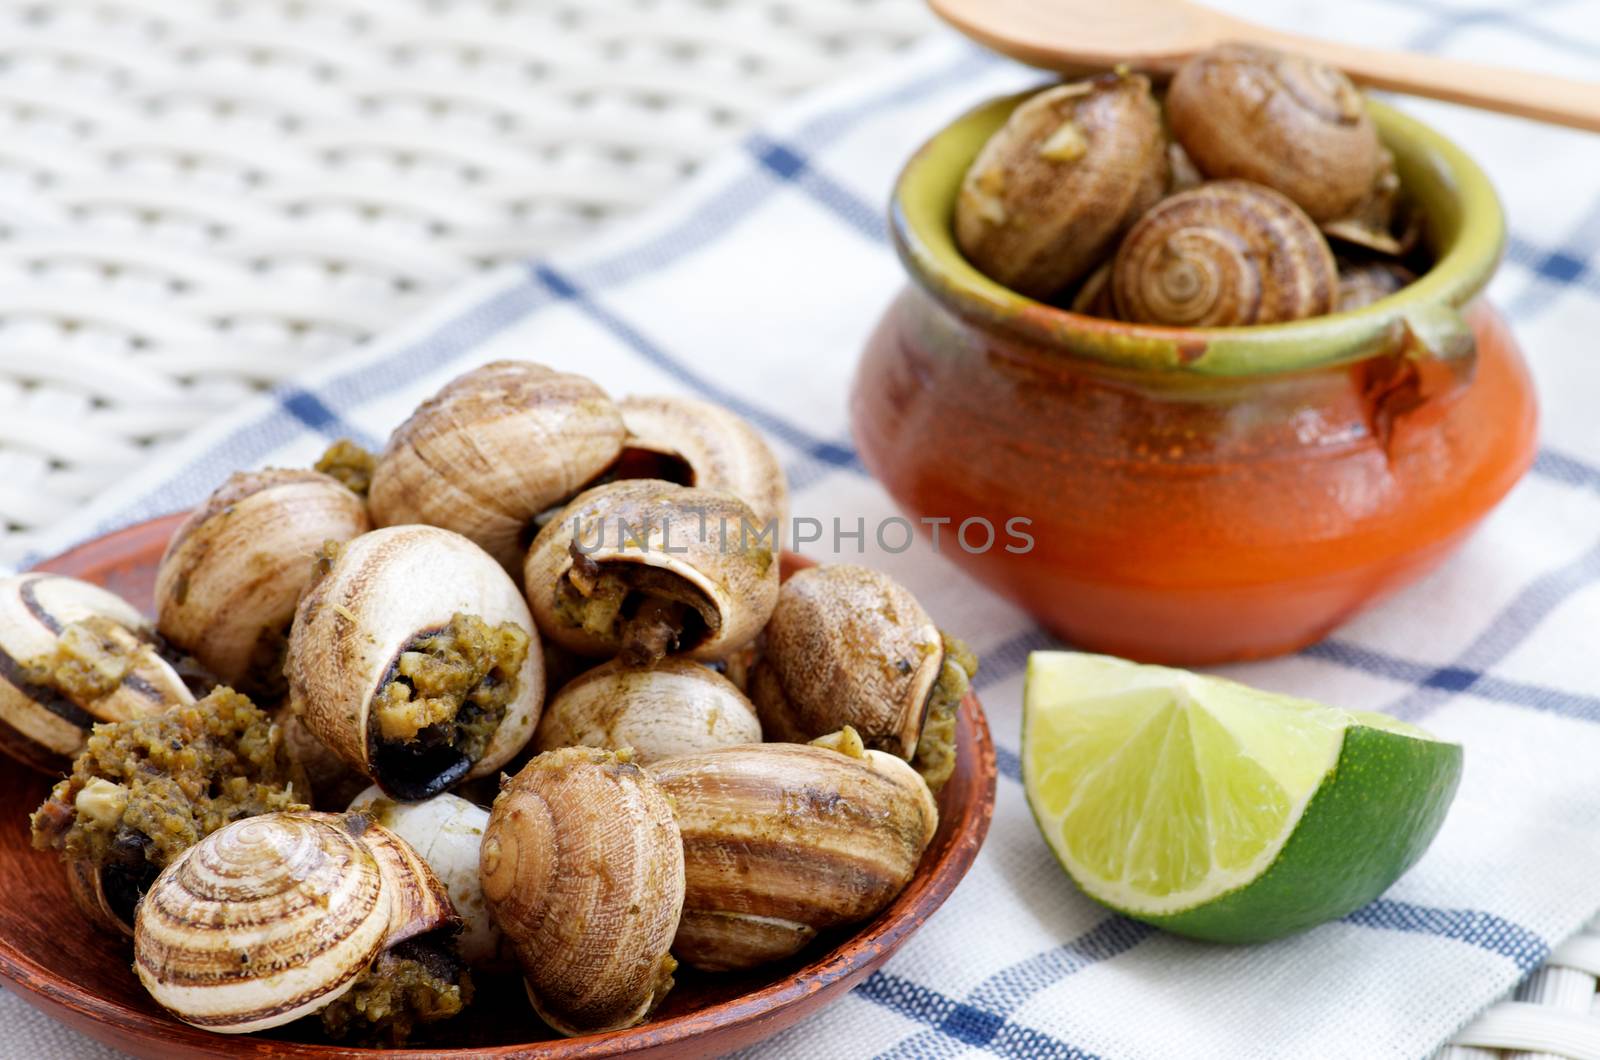 Delicious Escargot with Garlic Butter in Plate and Bowl with Lime closeup on Checkered Napkin. Focus on Foreground